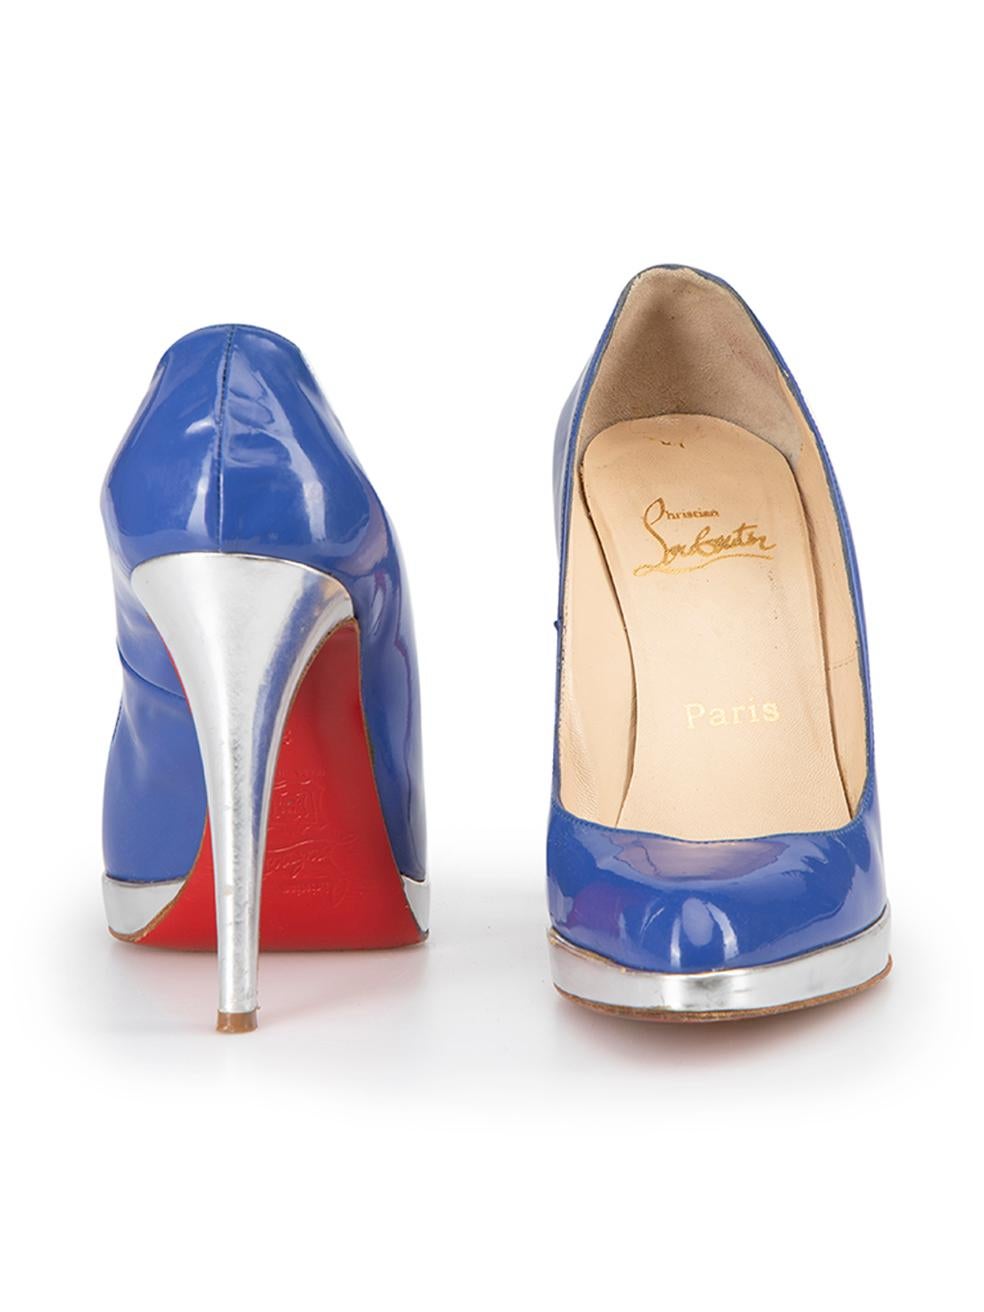 Christian Louboutin Women's Blue Patent Leather Silver Detail Pumps In Good Condition For Sale In London, GB